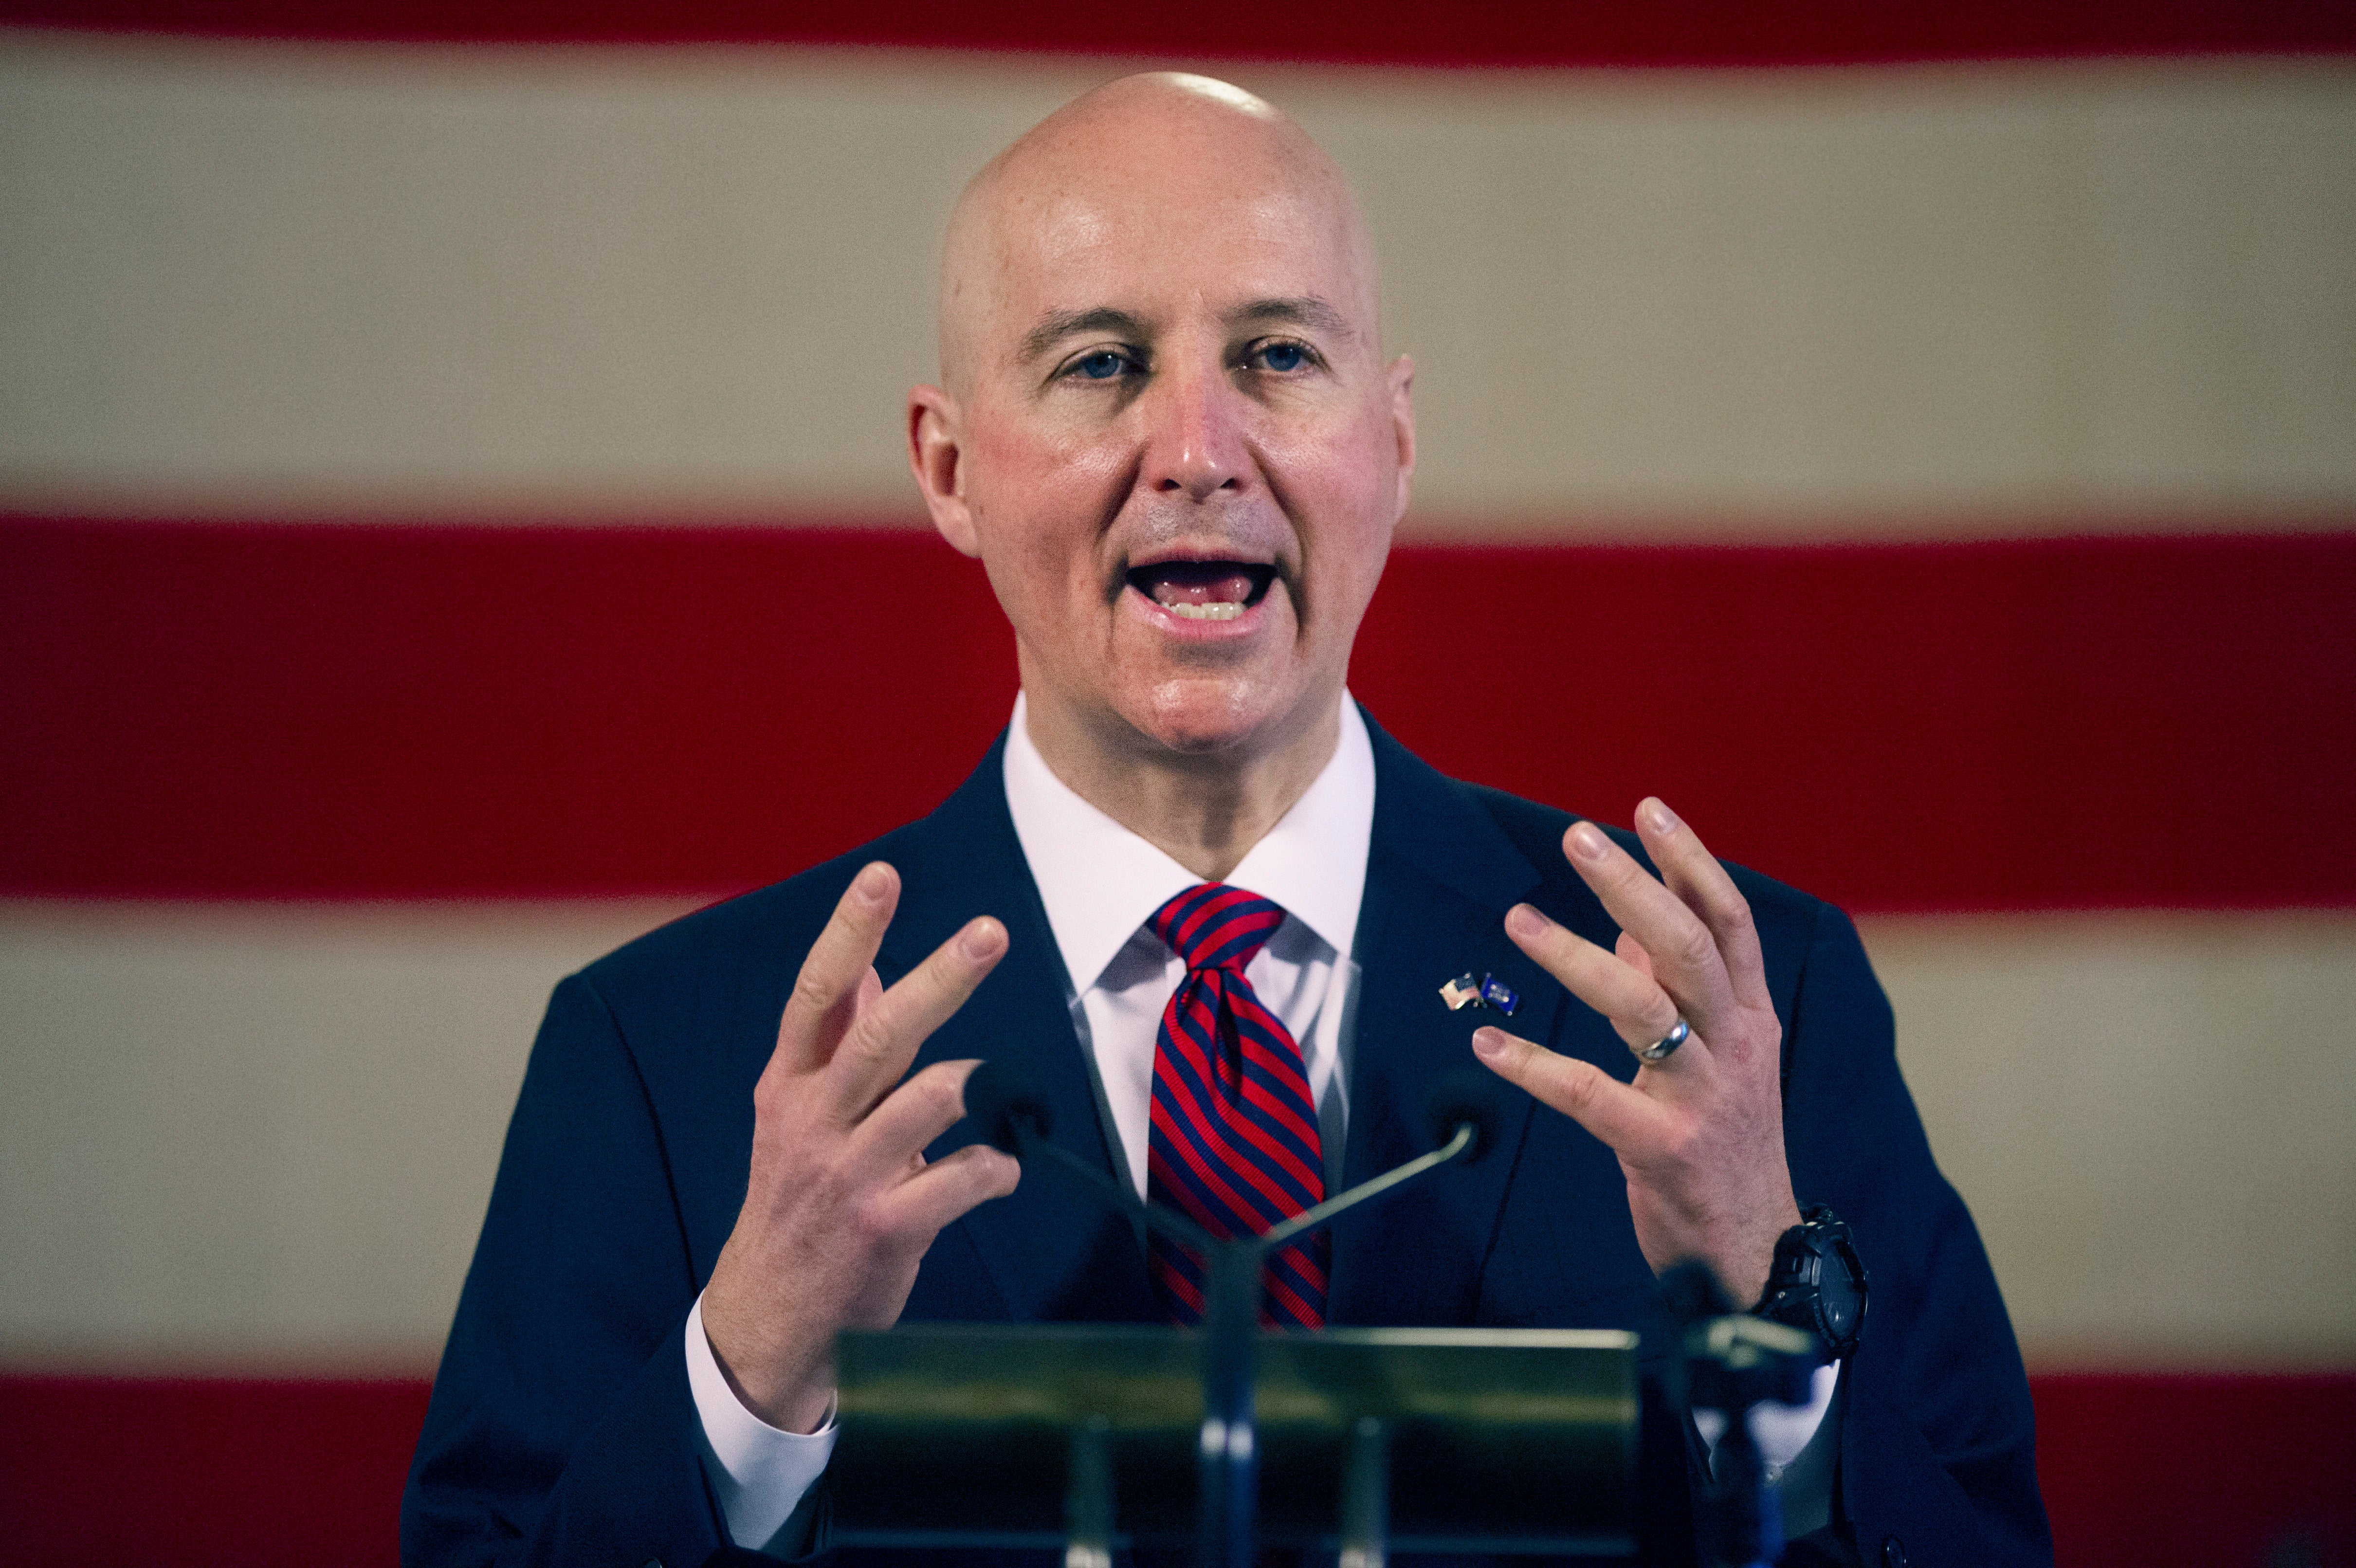 File: Nebraska Governor Pete Ricketts speaks during a news conference in February